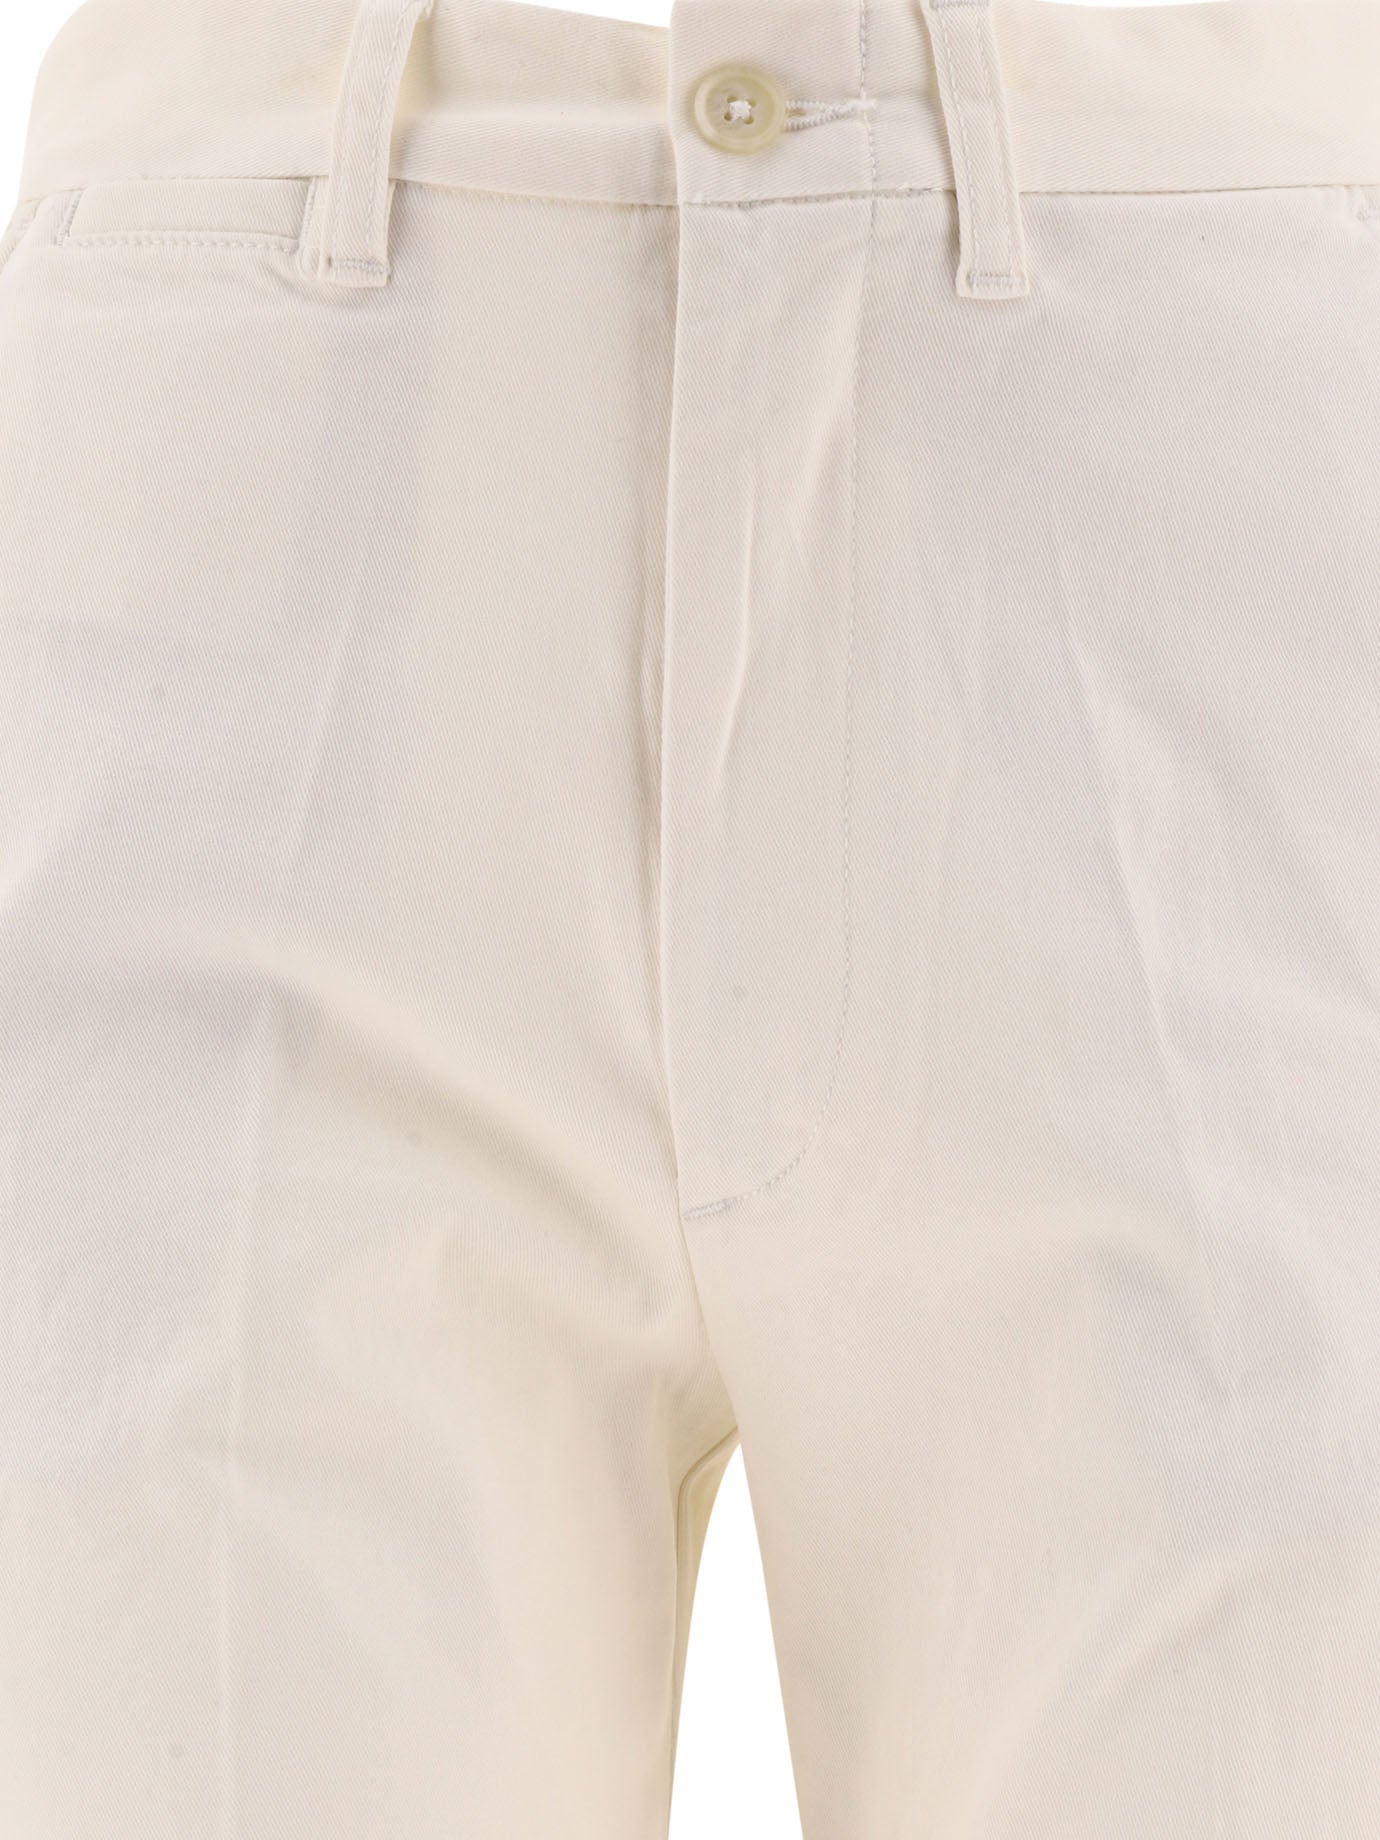 Vintage Polo Ralph Lauren Chino Trousers – One Man's Trash